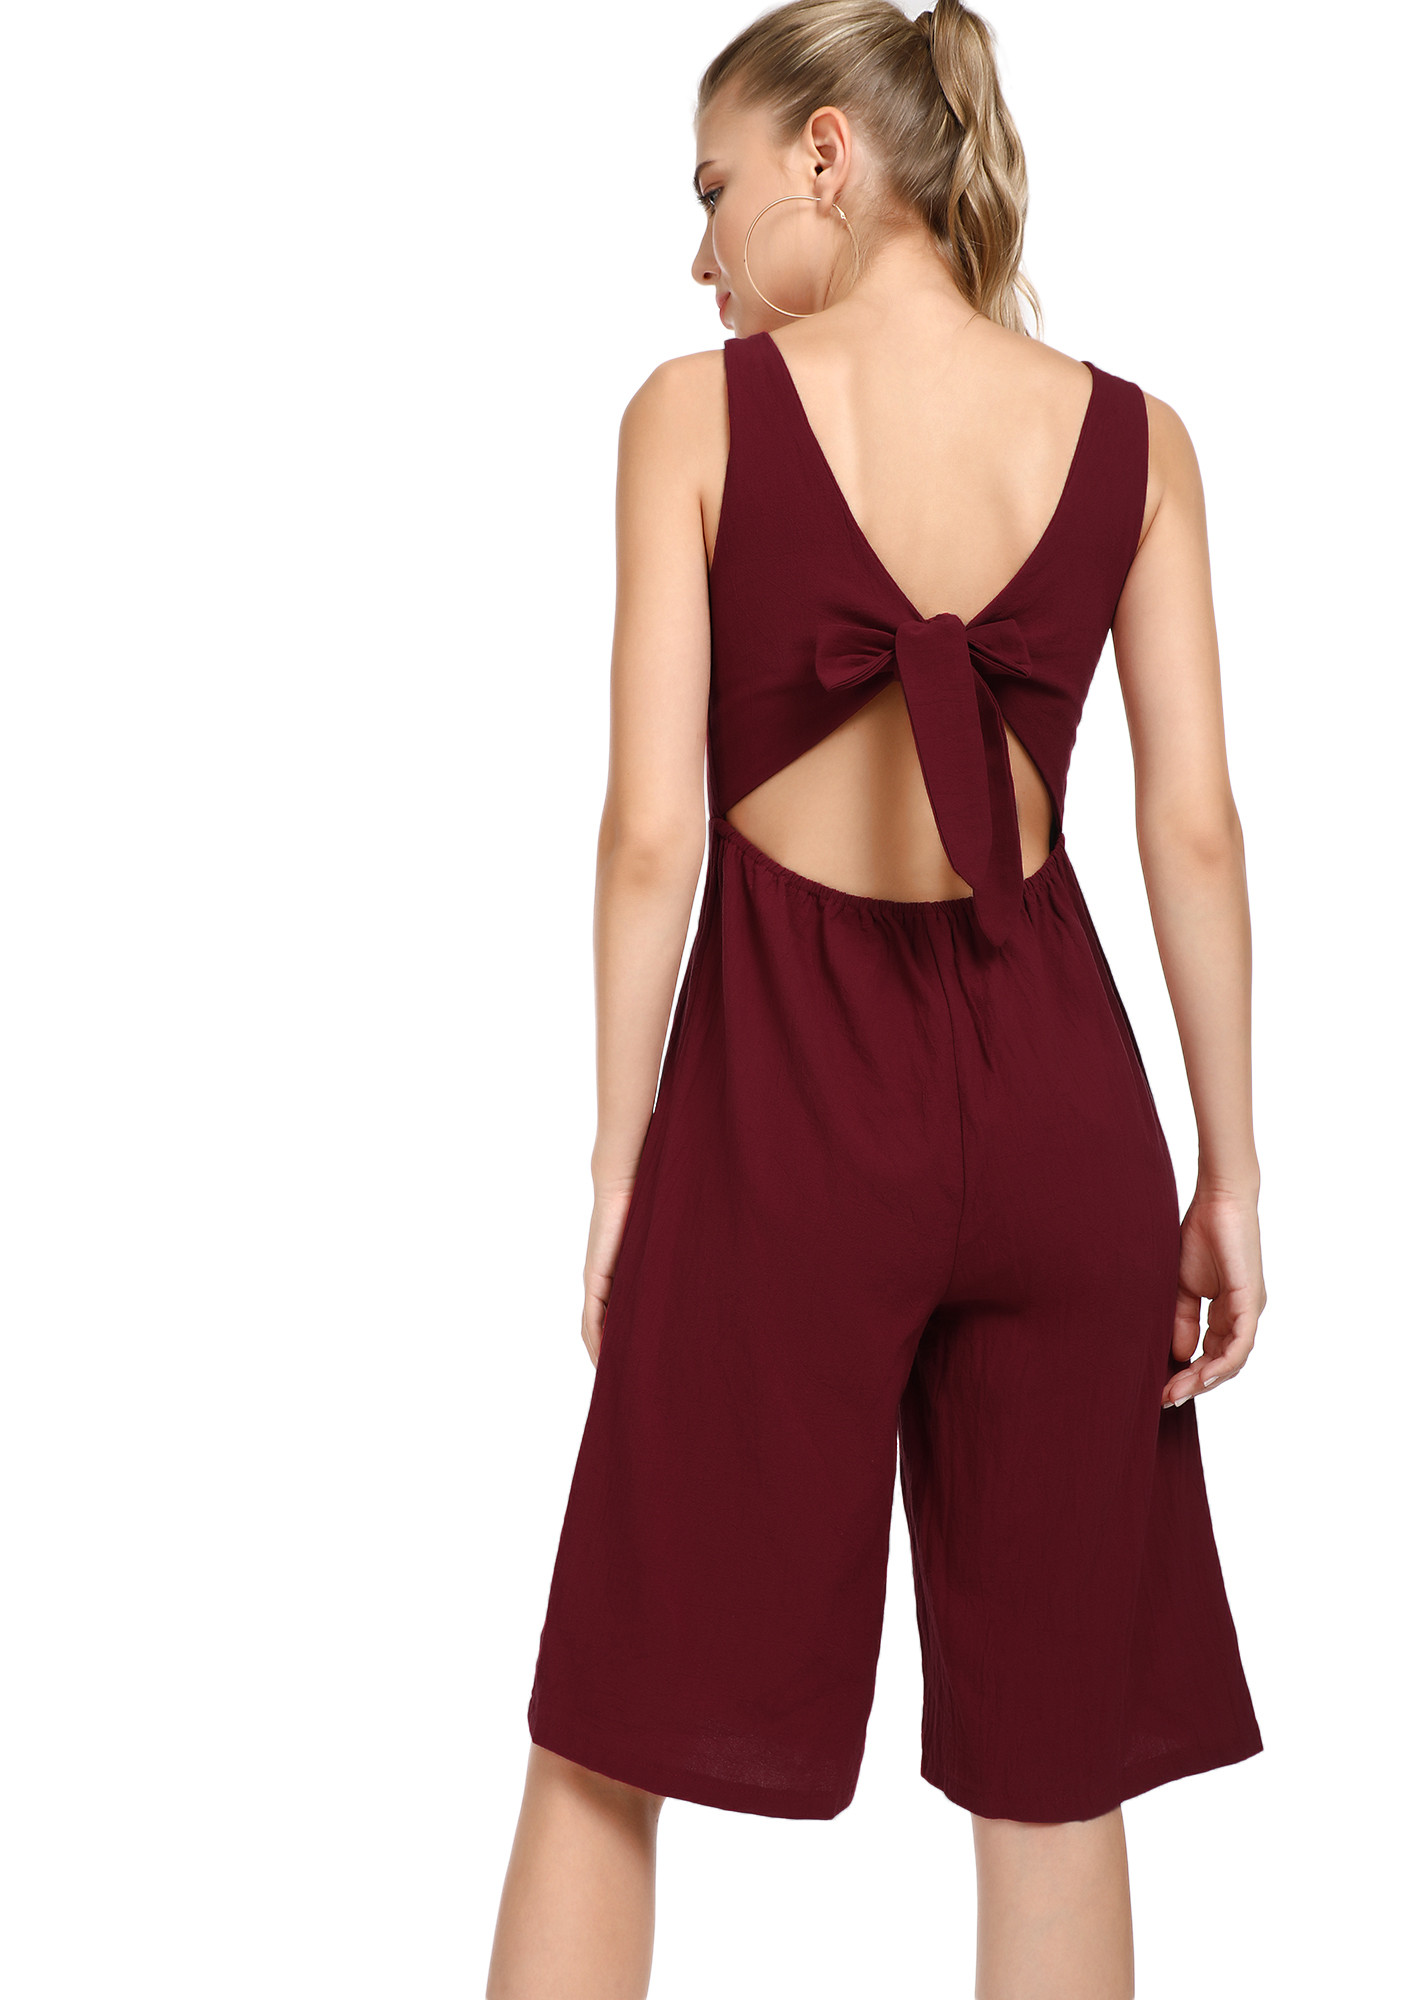 PLEASED TO SEE YOU MAROON JUMPSUIT